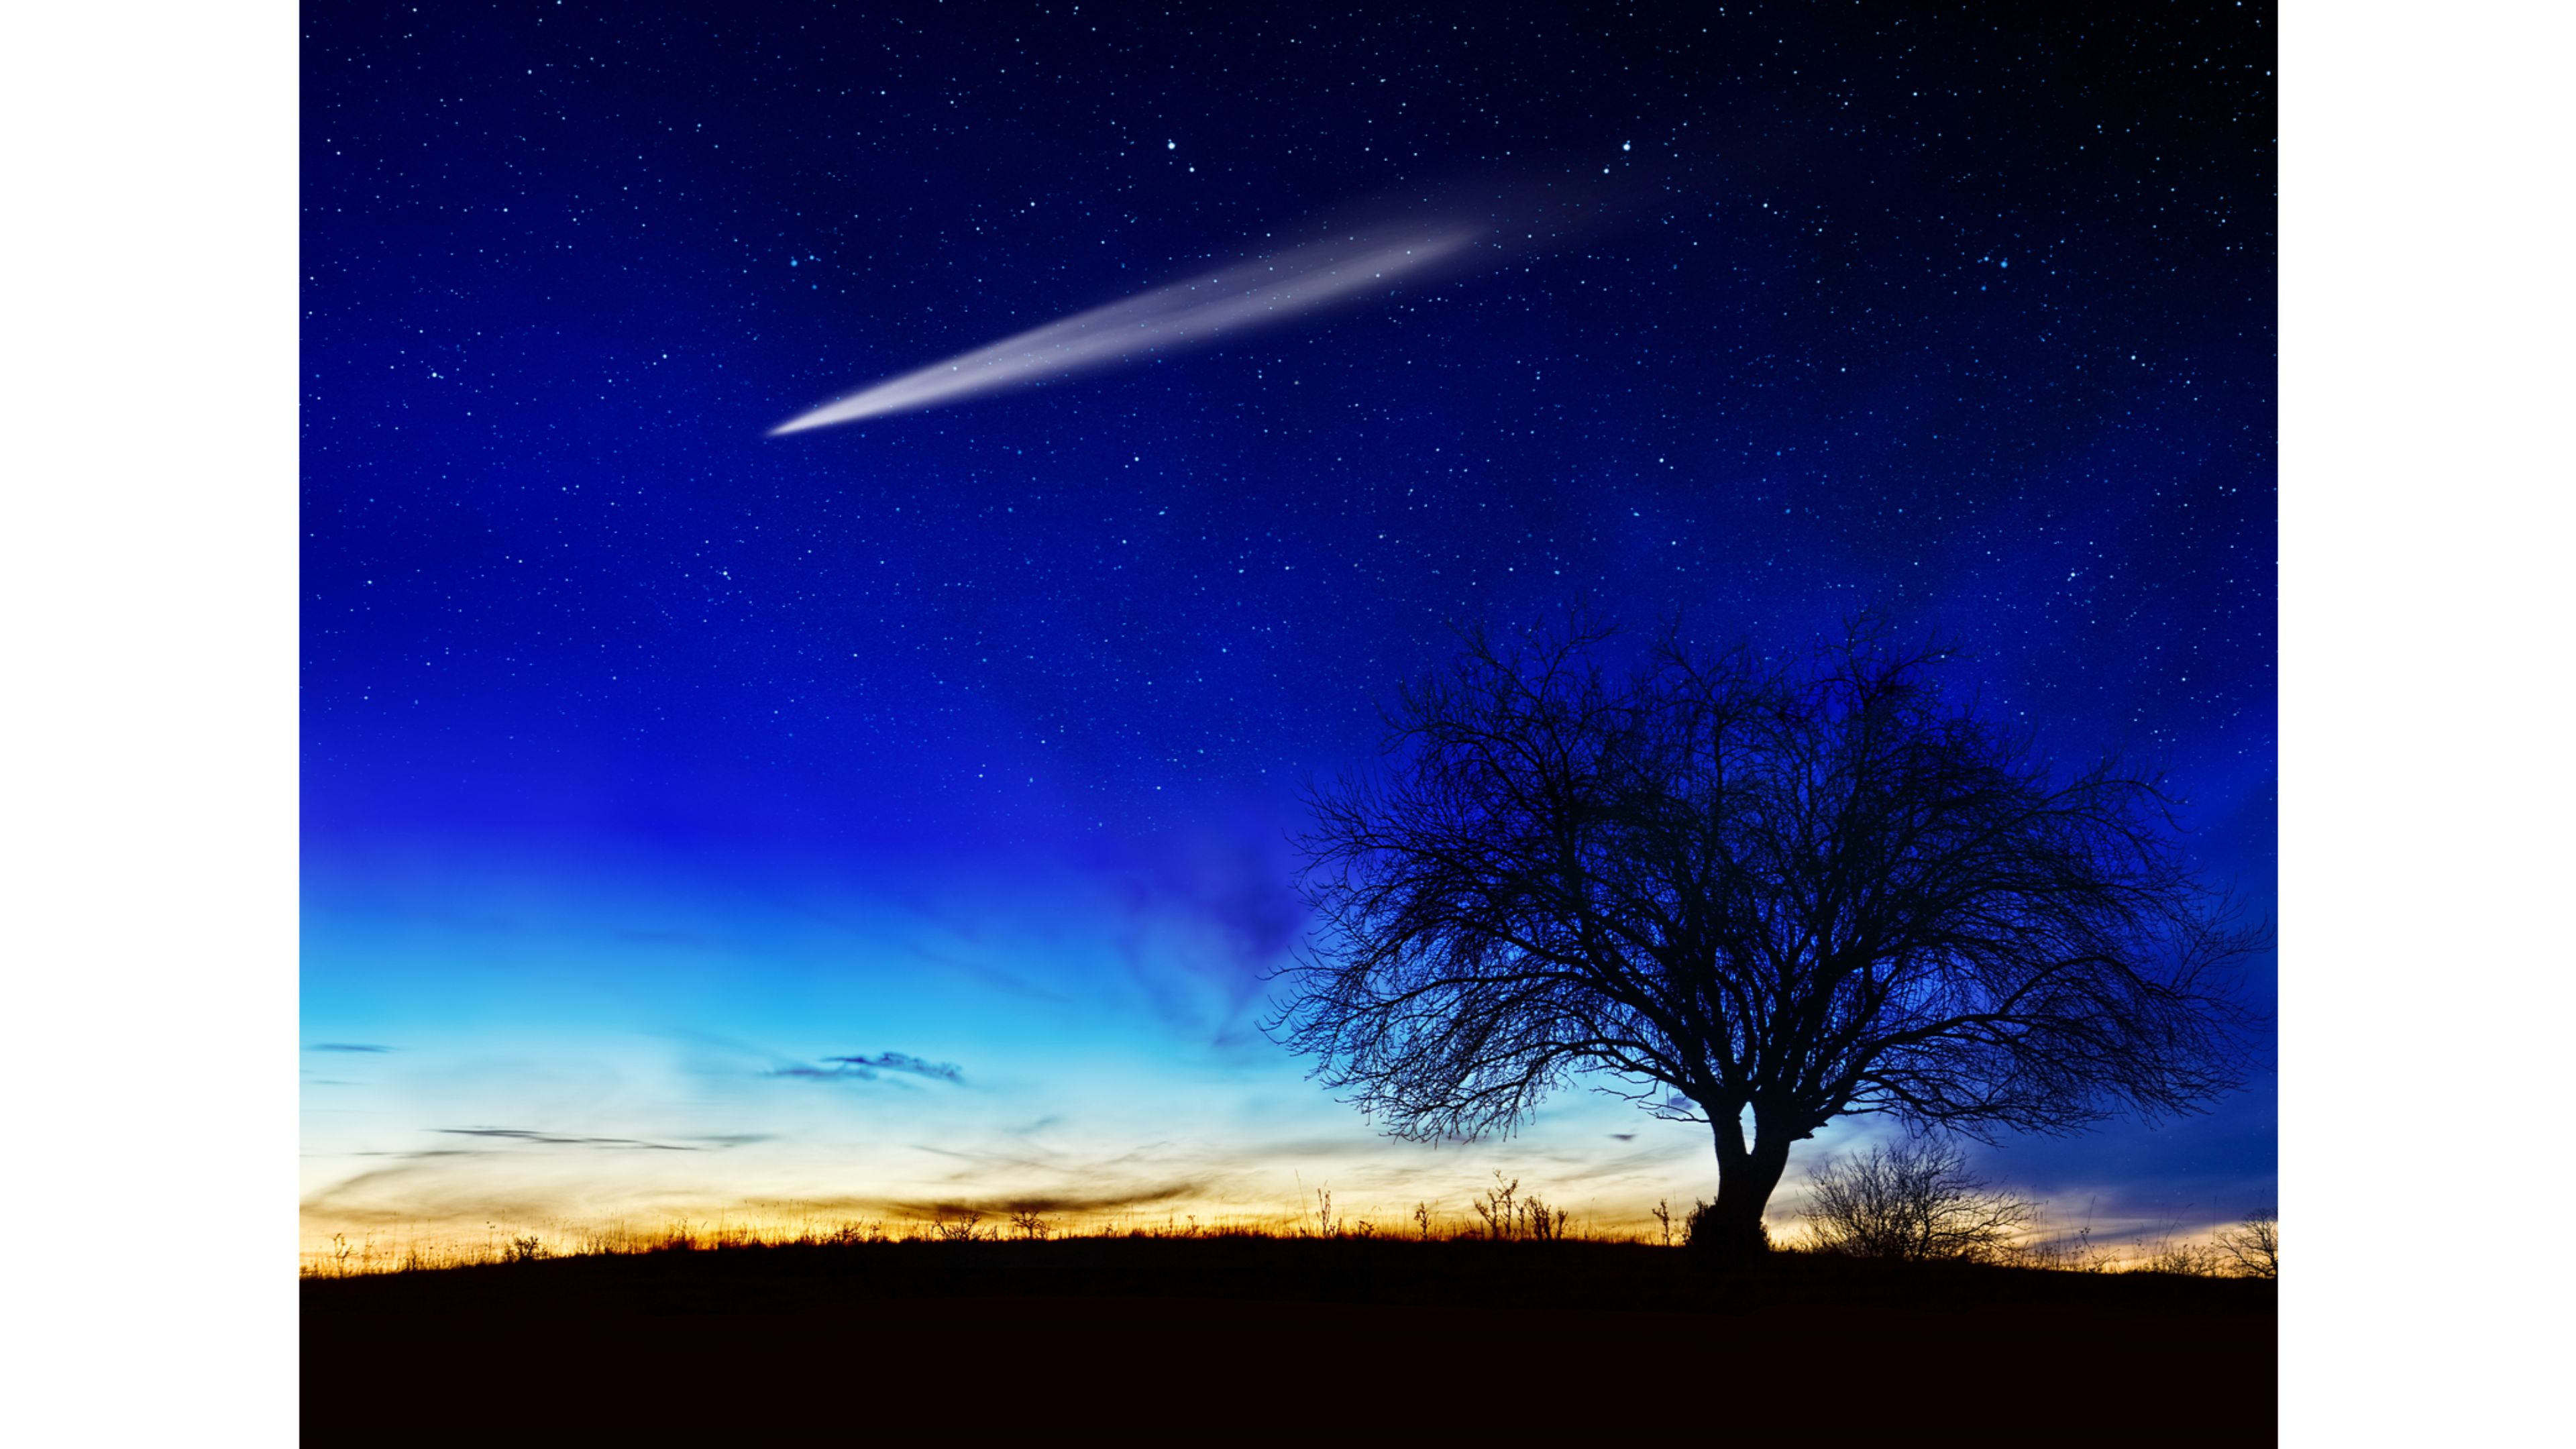 Sunrise Shooting Star Wallpaper - Free Pictures Of Shooting Stars - HD Wallpaper 